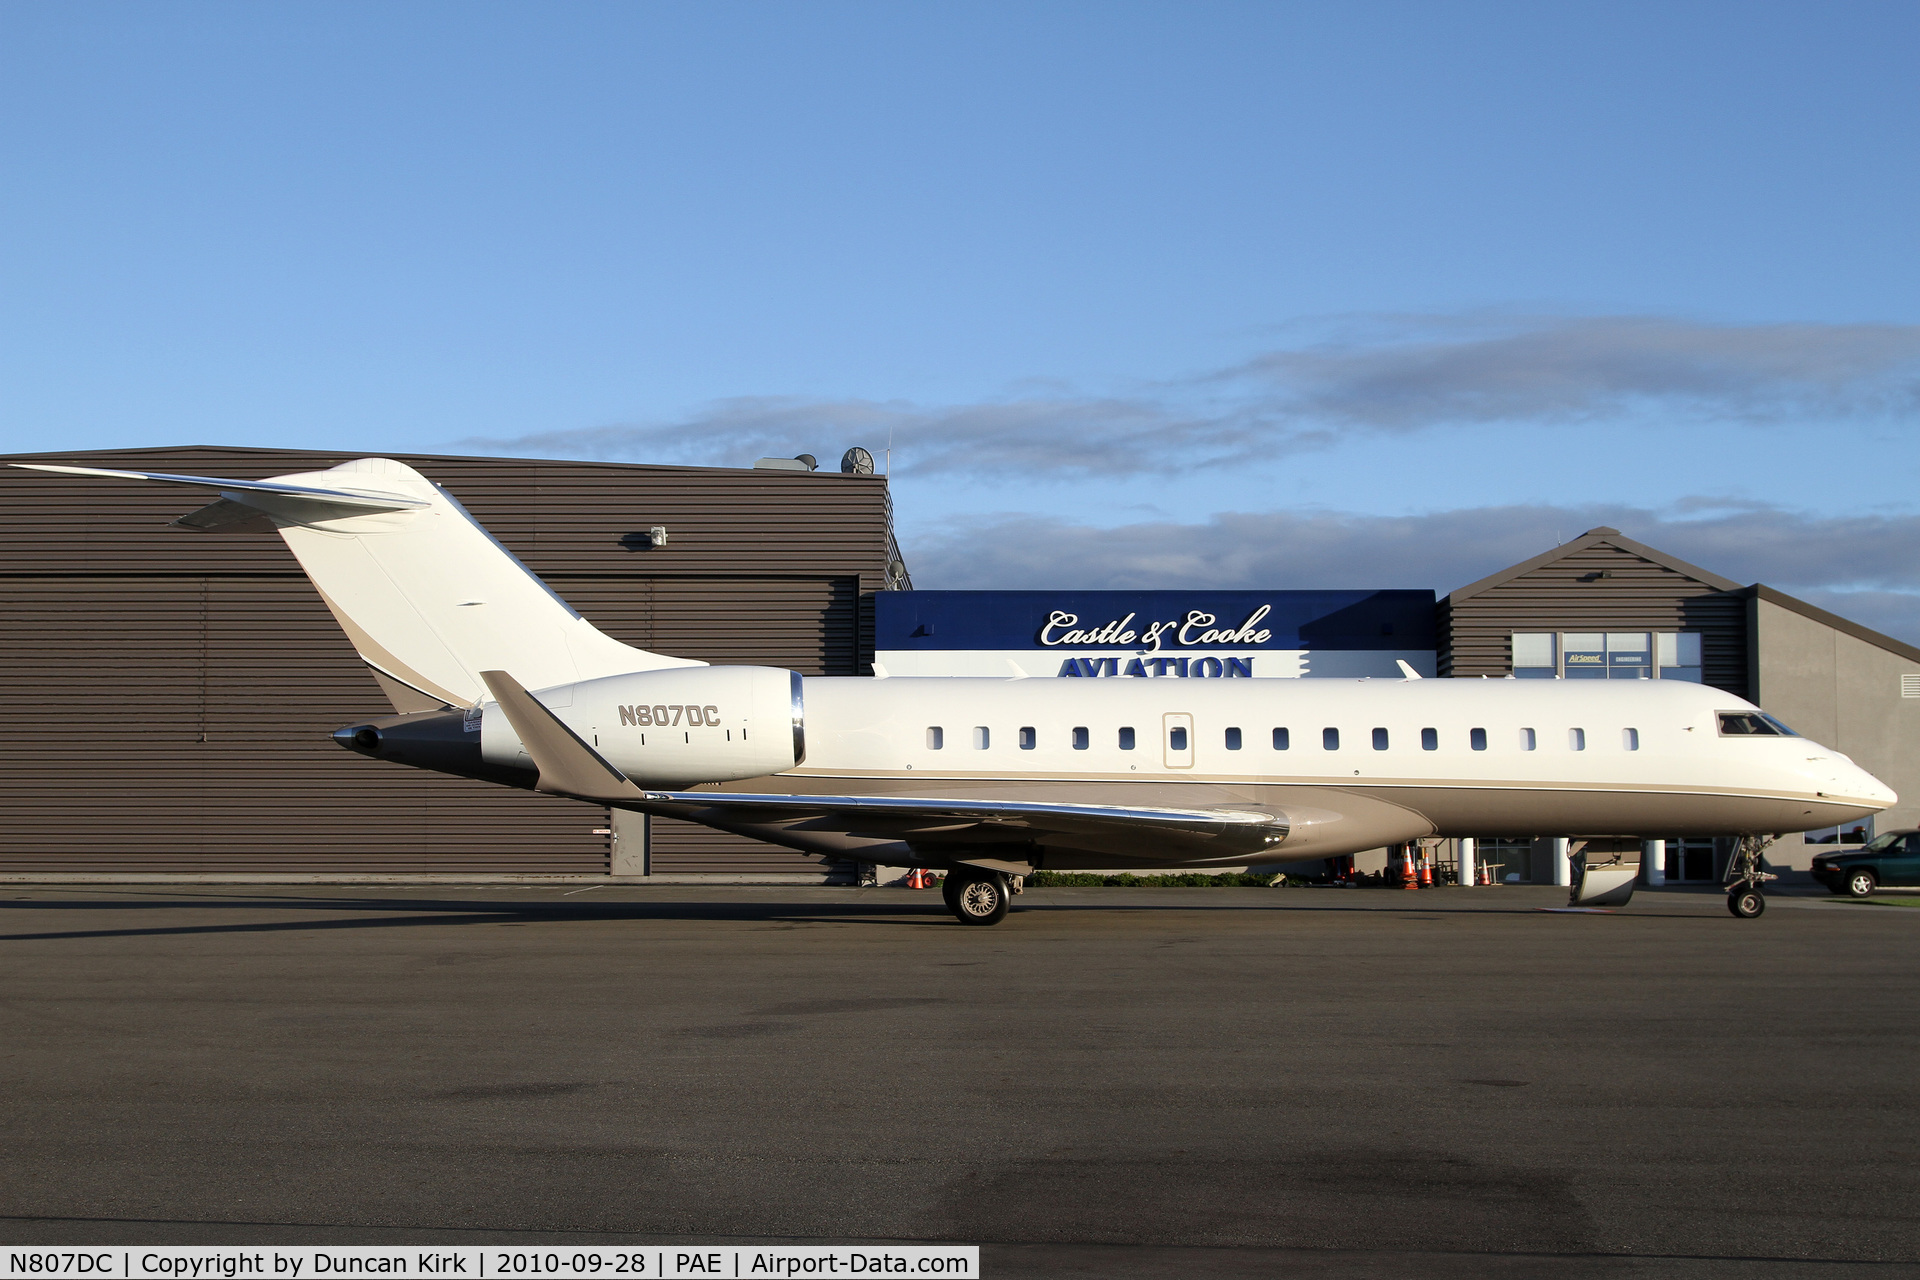 N807DC, 2008 Bombardier BD-700-1A10 Global Express XRS C/N 9314, Can't beat a Global Express!